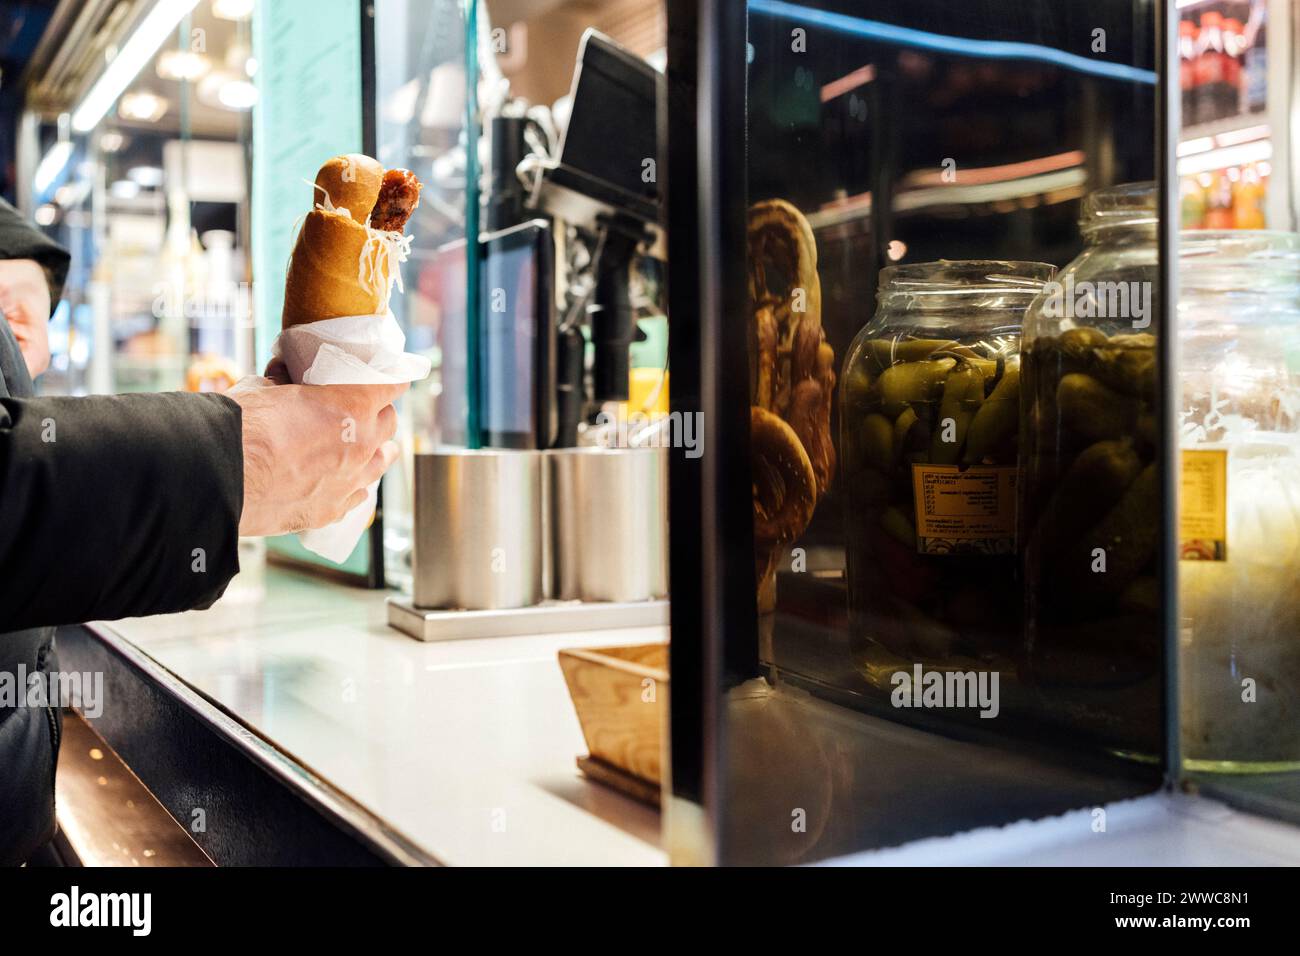 Young businessman buying hot dog from stand Stock Photo